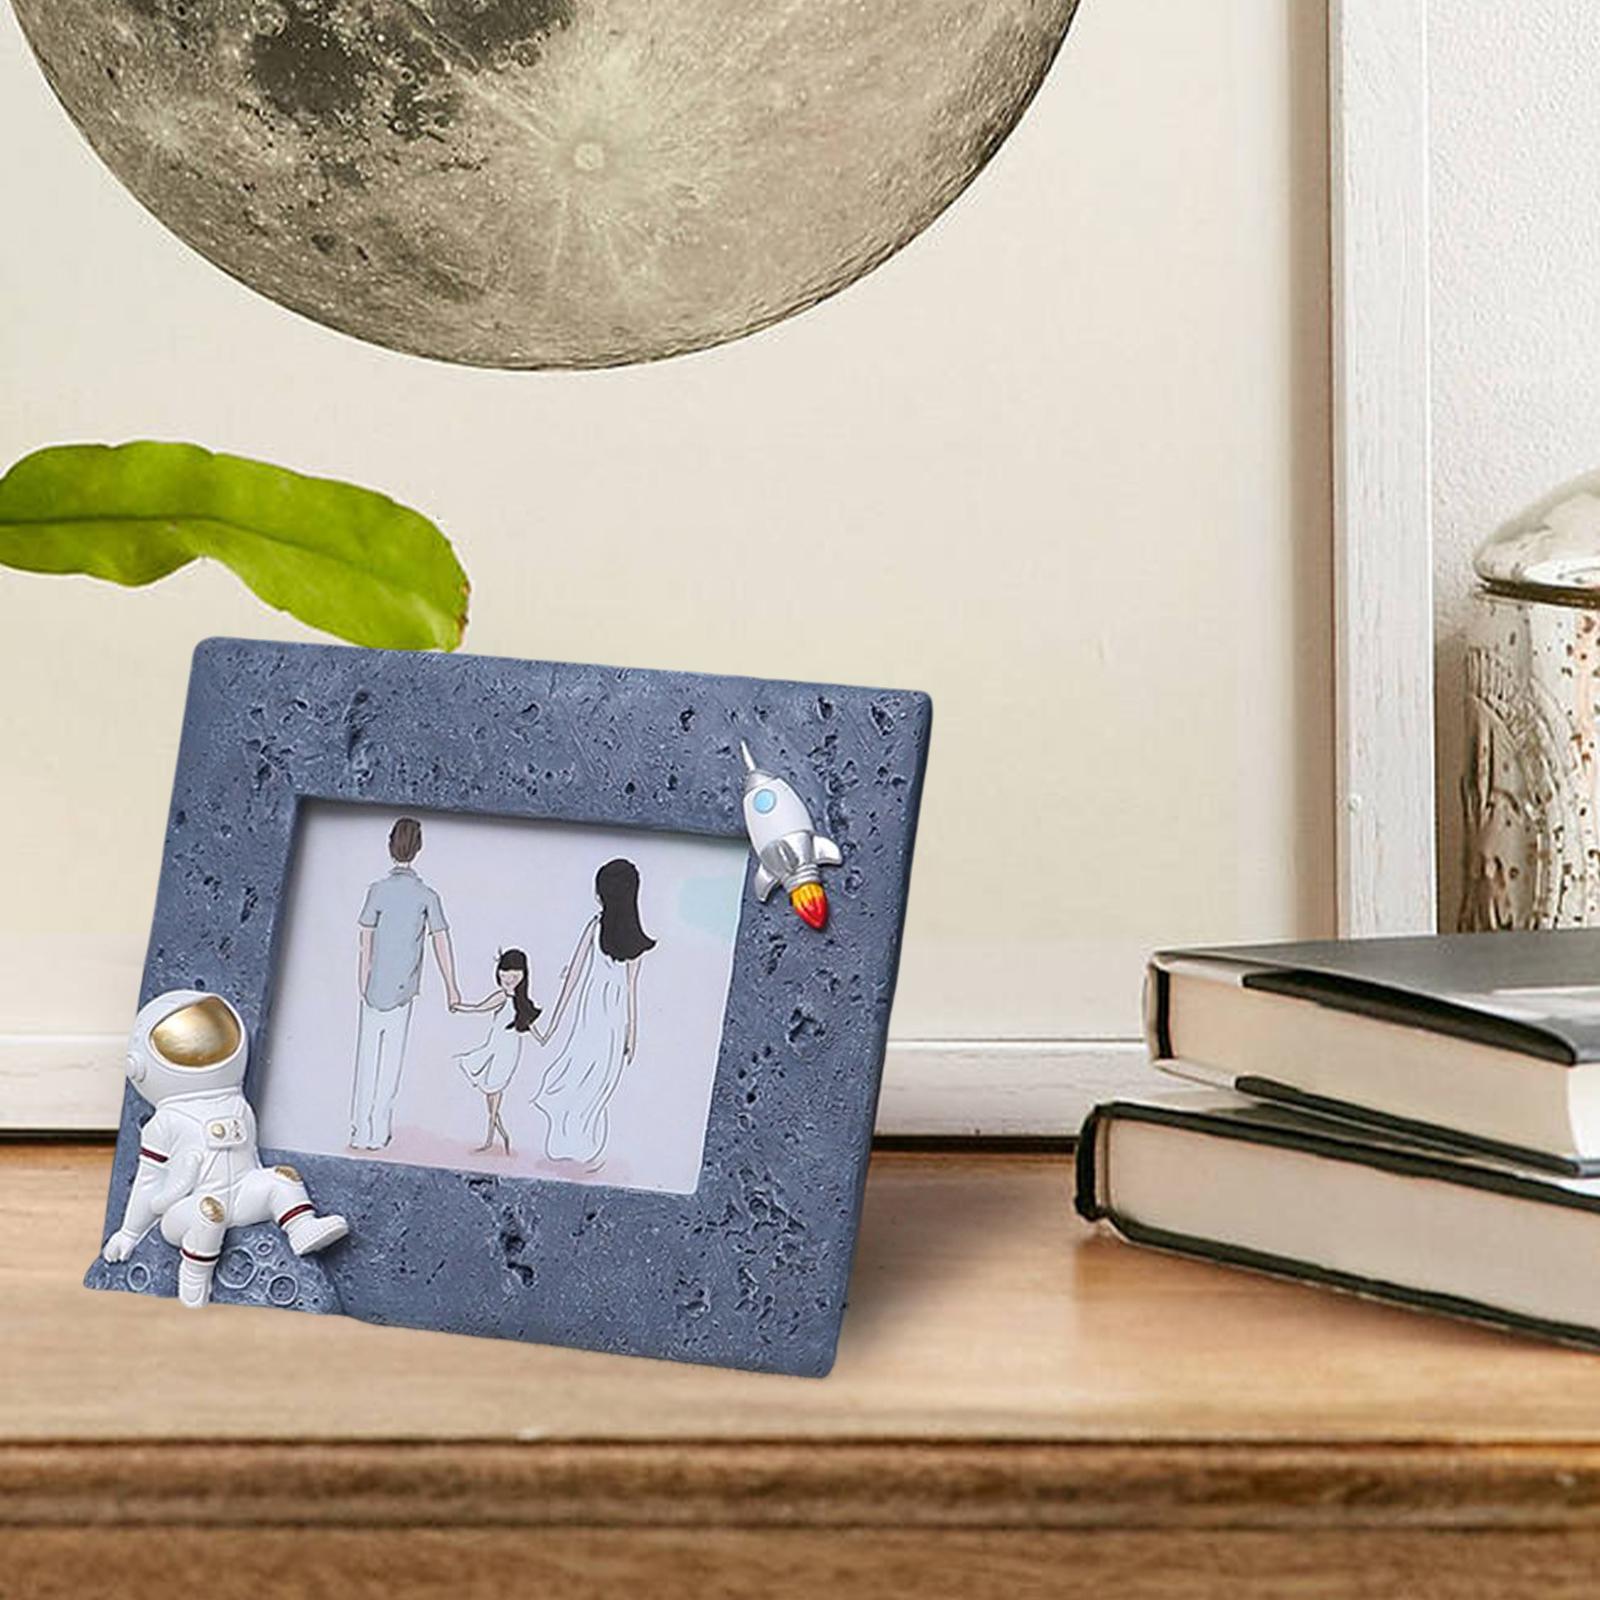 Resin Astronaut Photo Wall & Table Top Frames Photo Holder for Home 5inch 